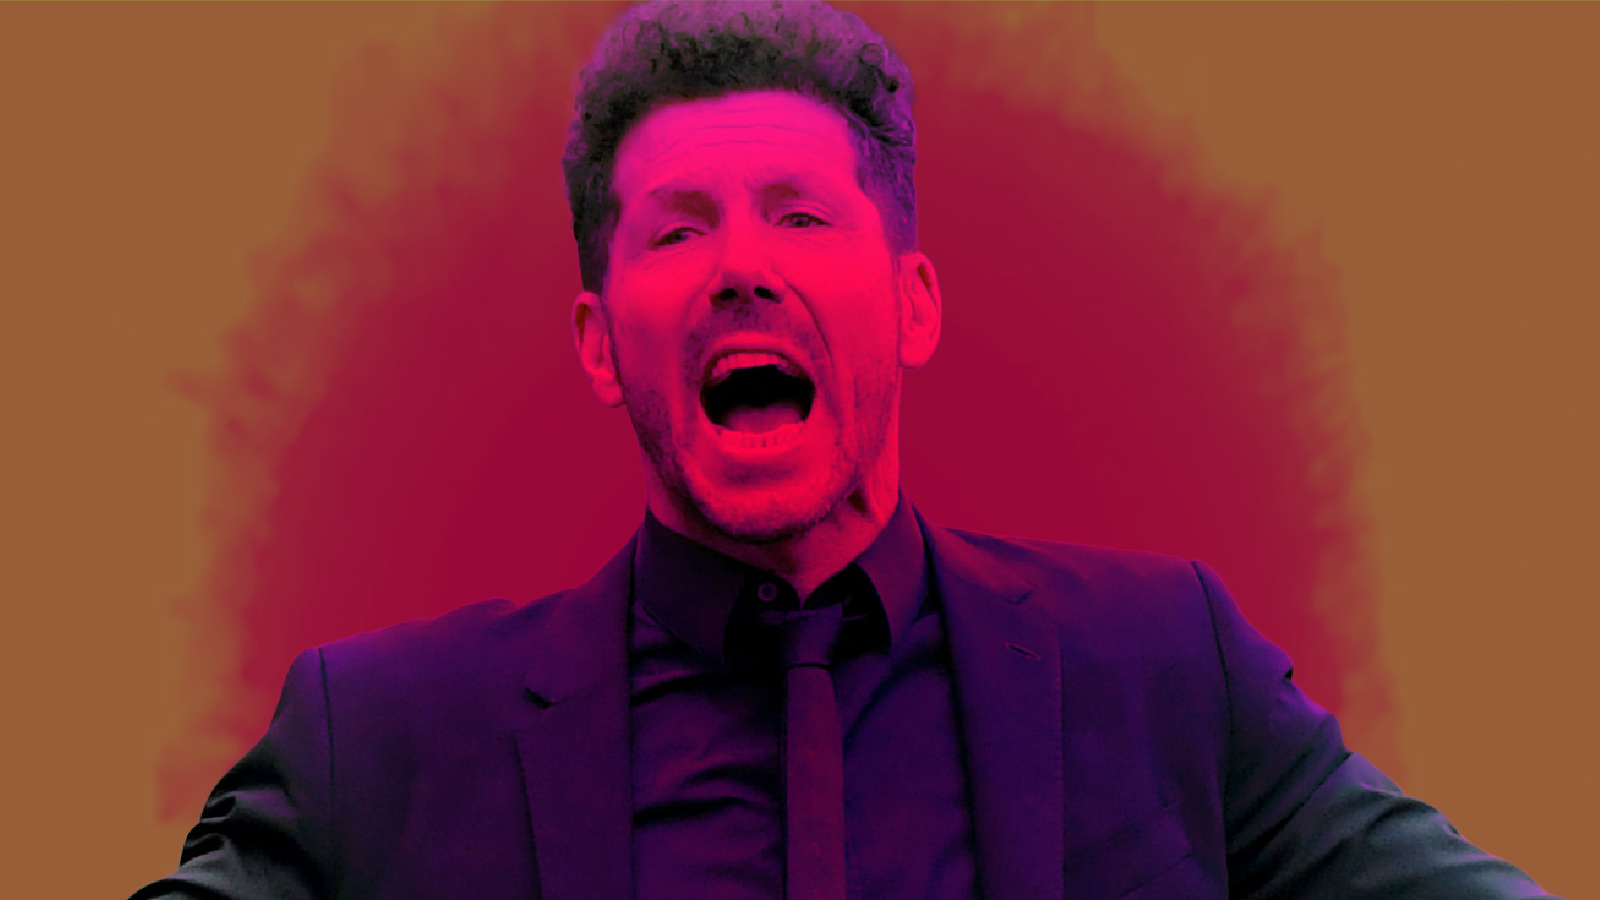 Video: Diego Simeone reacts wildly to a last-minute clearance against Valladolid